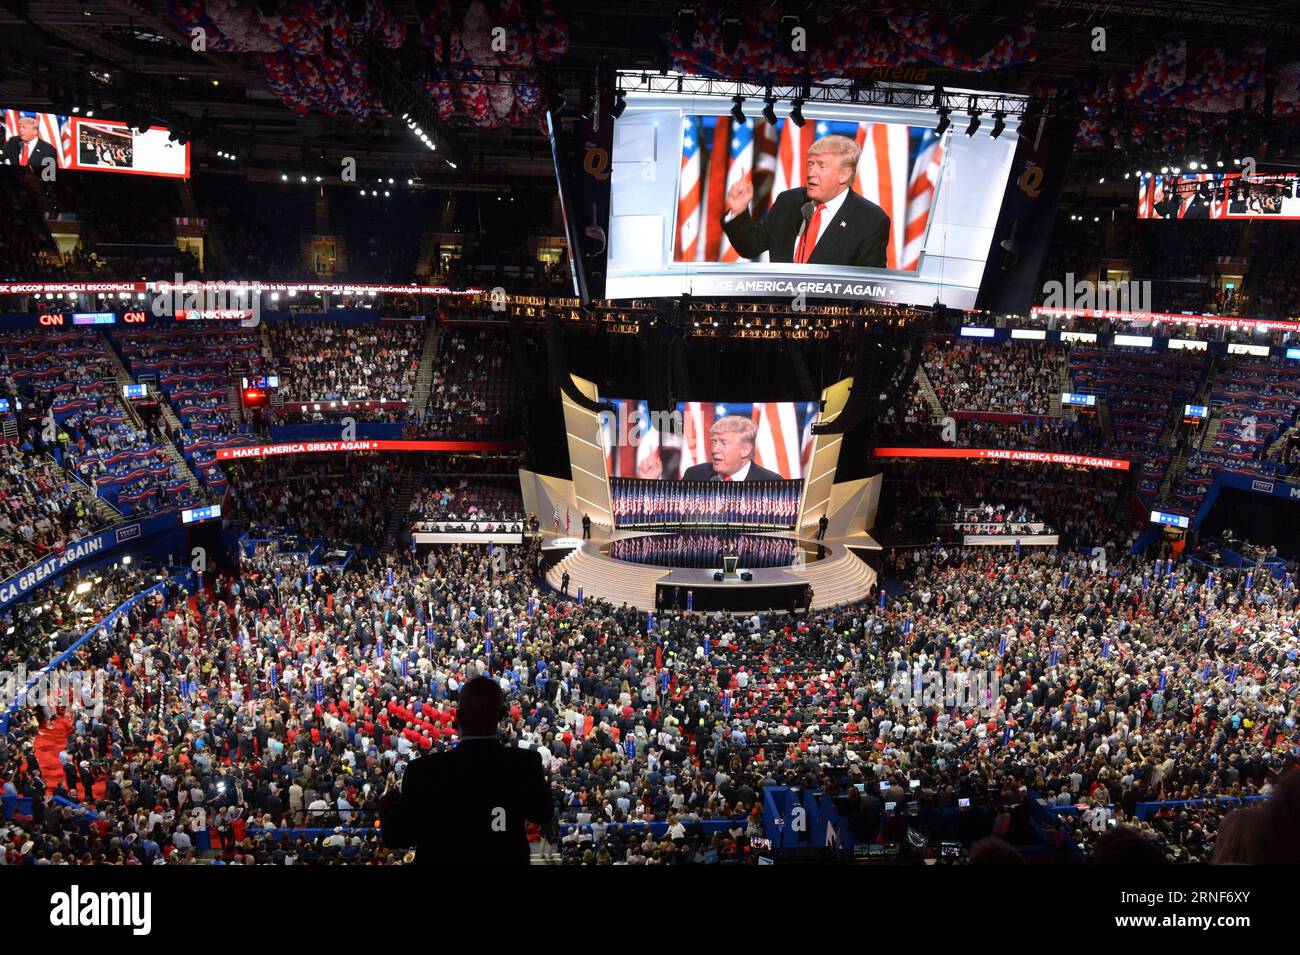 (160722) -- CLEVELAND, July 21, 2016 -- Donald Trump takes the stage on the last day of the Republican National Convention in Cleveland, Ohio, the United States, July 21, 2016. New York billionaire Donald Trump officially accepted the presidential nomination of the U.S. Republican Party Thursday night on the final day of the Republican National Convention. ) US-CLEVELAND-TRUMP-GOP-PRESIDENTIAL NOMINATION-ACCEPTION yinxbogu PUBLICATIONxNOTxINxCHN   160722 Cleveland July 21 2016 Donald Trump Takes The Stage ON The Load Day of The Republican National Convention in Cleveland Ohio The United States Stock Photo